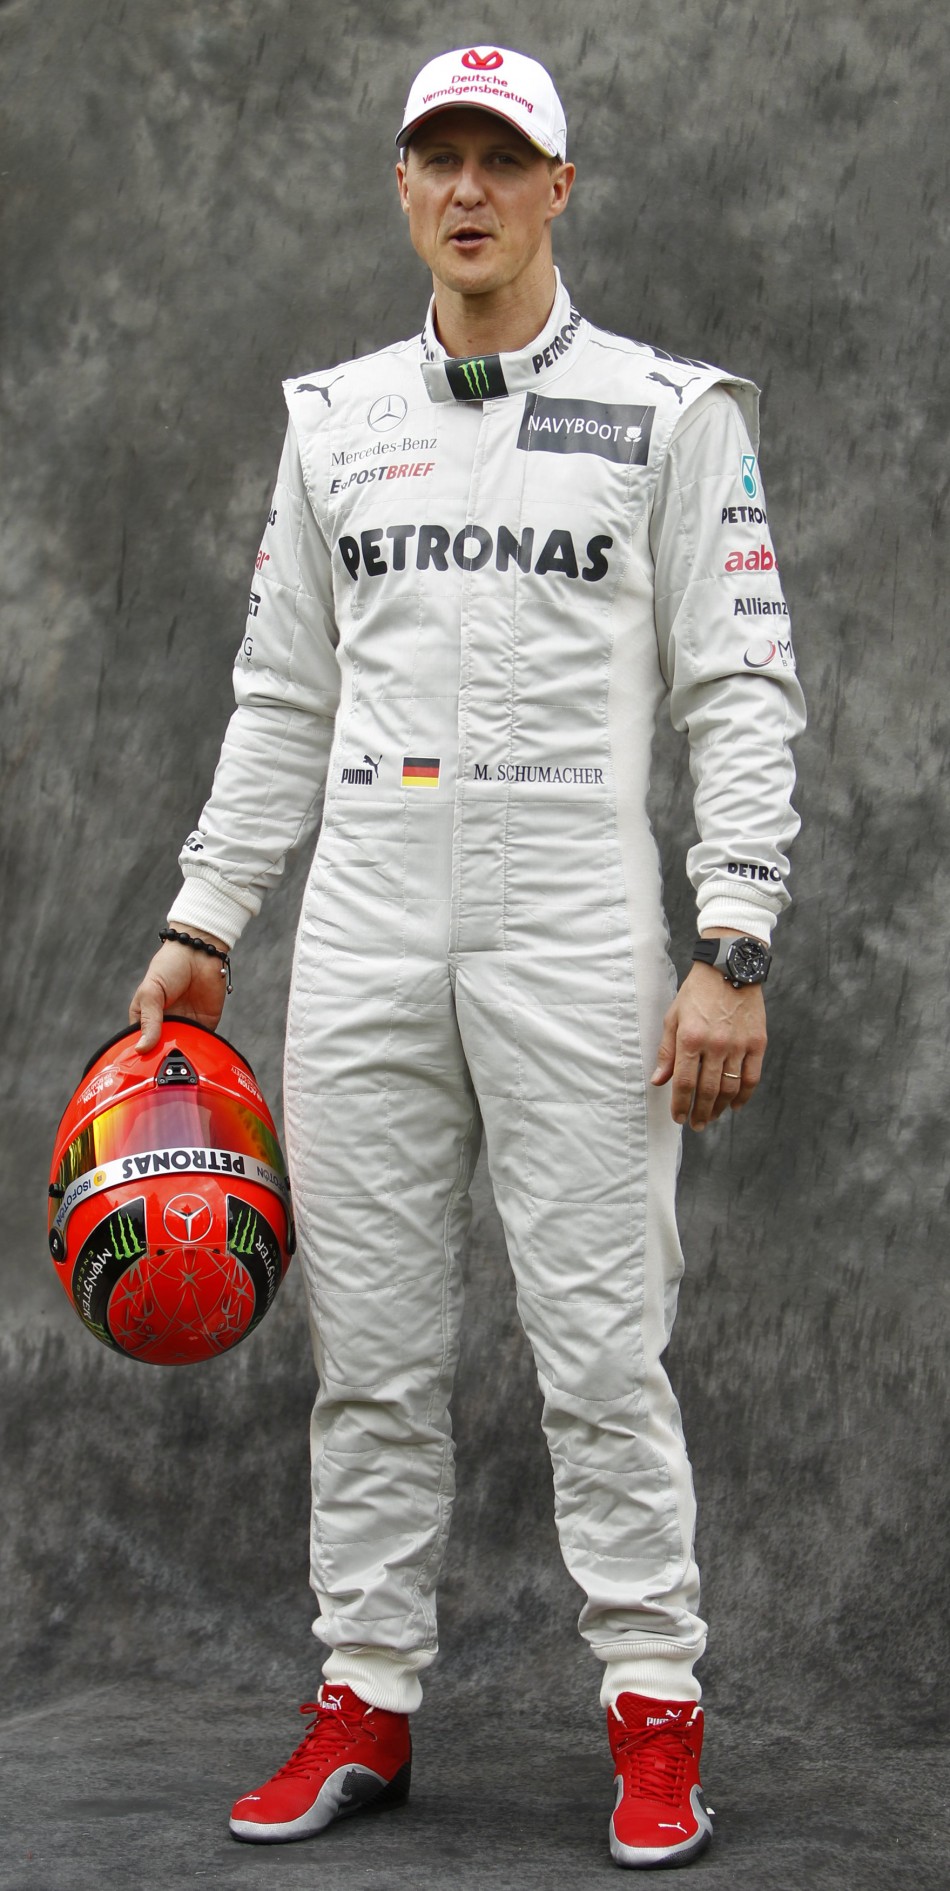 Mercedes Formula One driver Schumacher poses prior to the Australian F1 Grand Prix at the Albert Park circuit in Melbourne